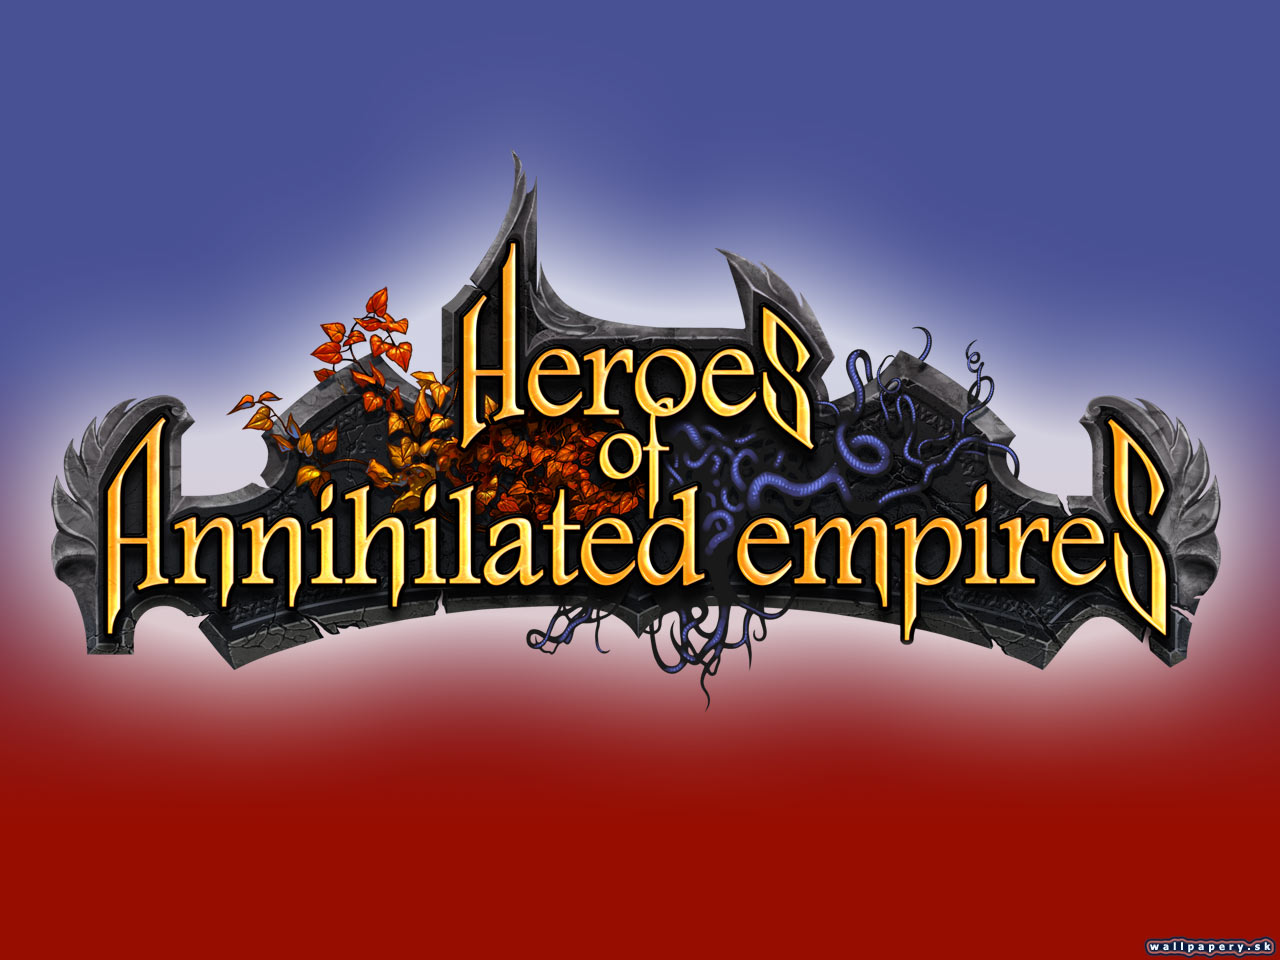 Heroes of Annihilated Empires - wallpaper 18